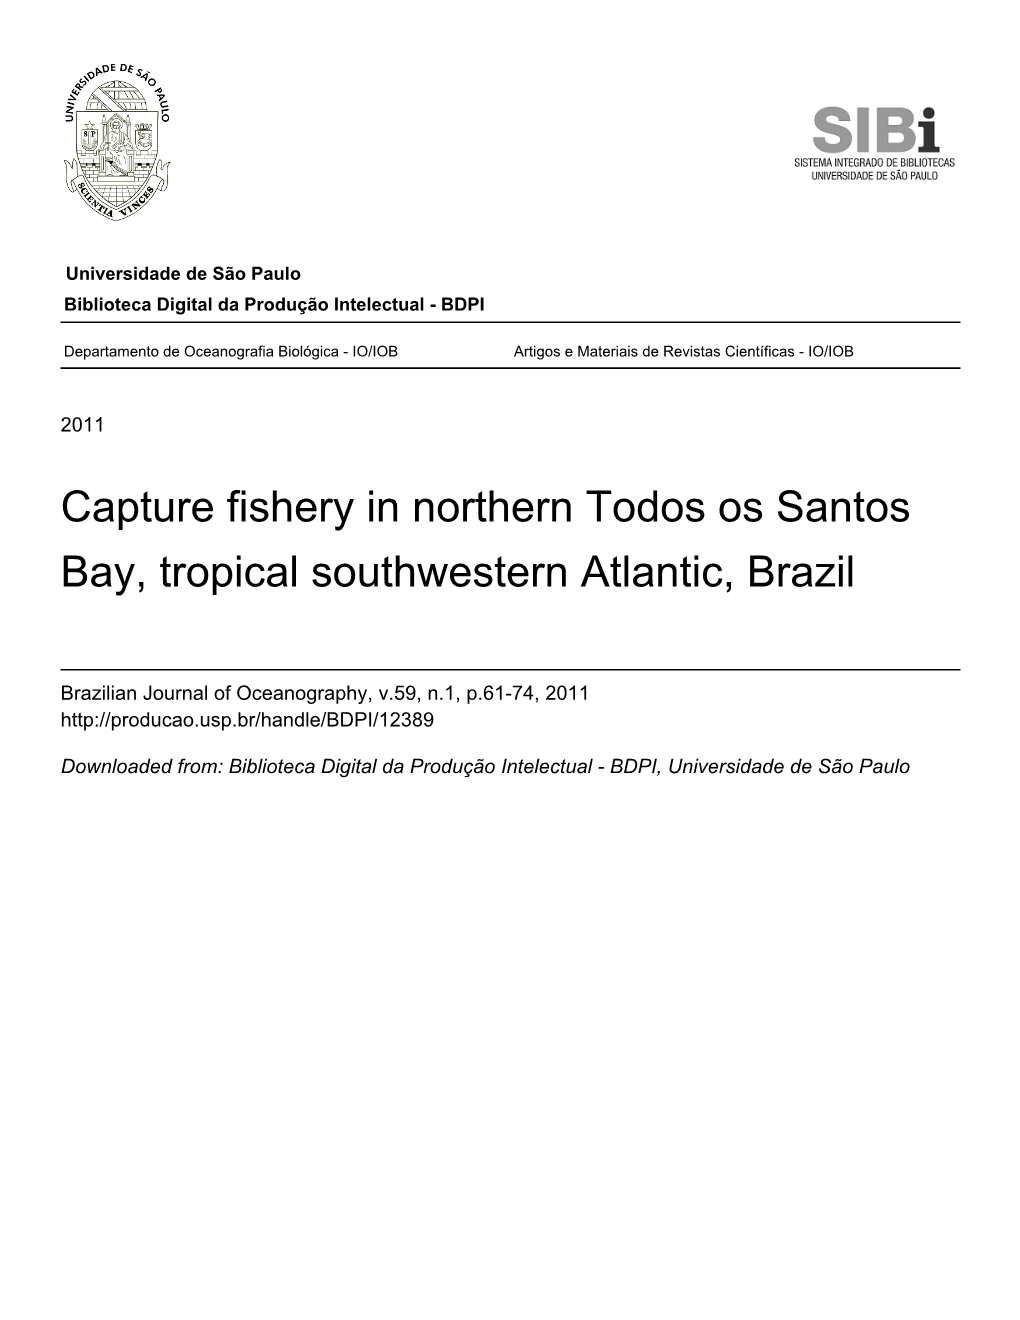 Capture Fishery in Northern Todos Os Santos Bay, Tropical Southwestern Atlantic, Brazil